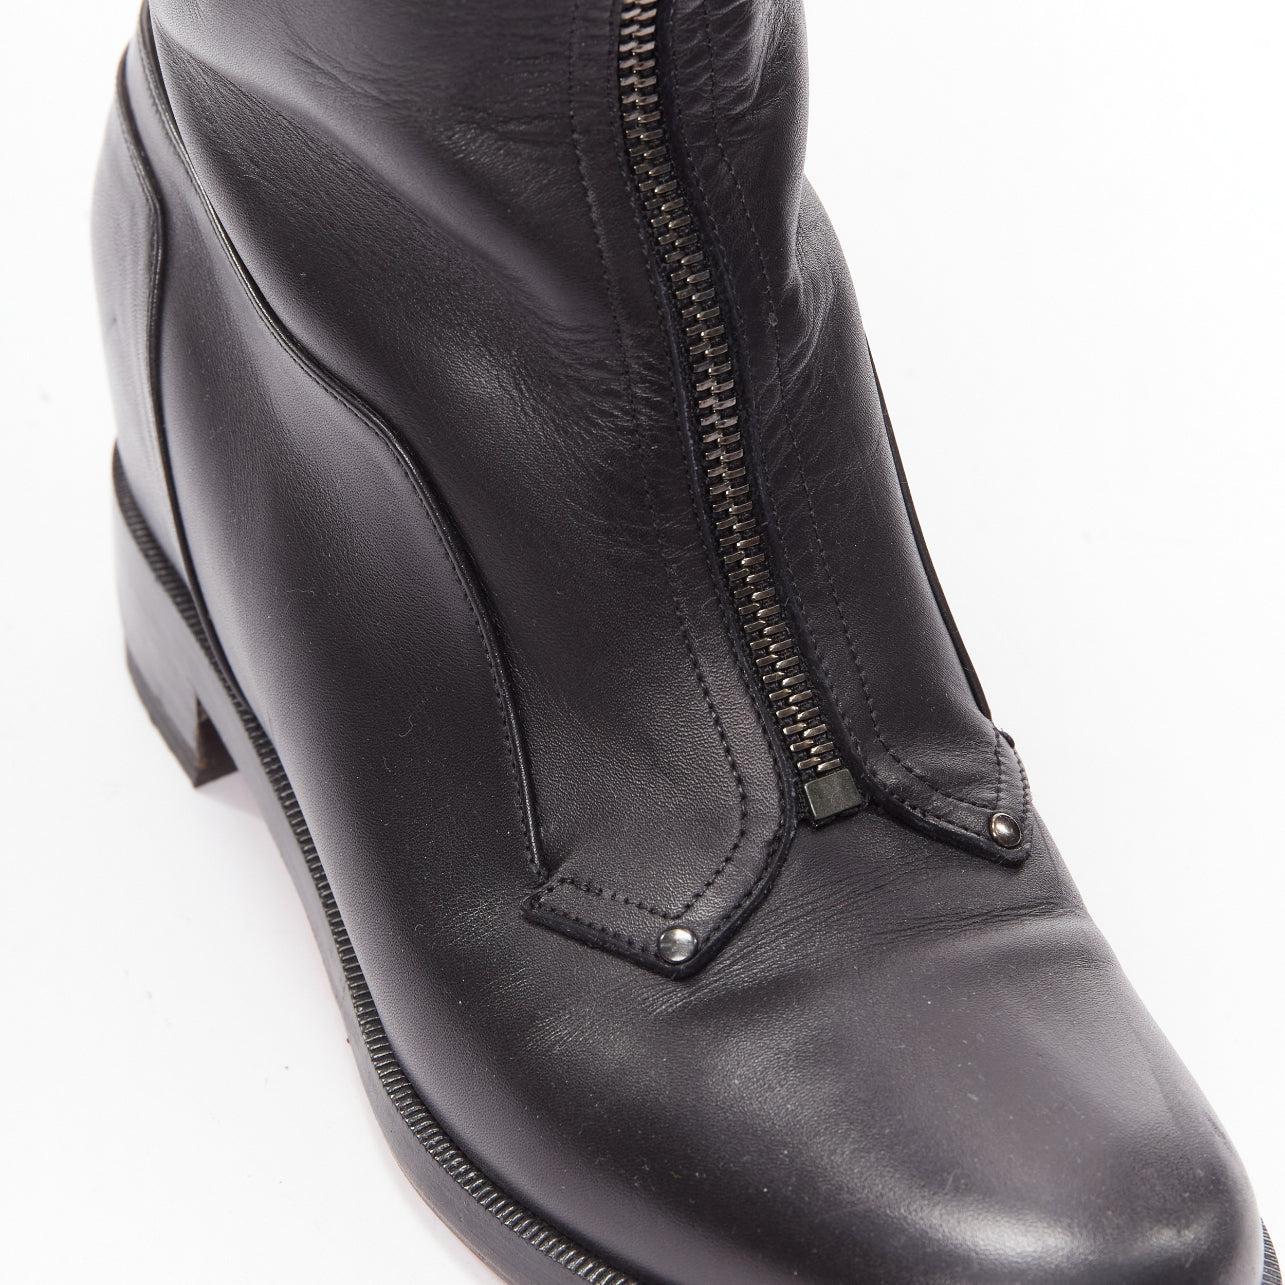 CHRISTIAN LOUBOUTIN black leather zip front concealed wedge riding boot EU40
Reference: TGAS/D01006
Brand: Christian Louboutin
Material: Leather, Wood
Color: Black
Pattern: Solid
Closure: Zip
Extra Details: Zip front with signature Louboutin red